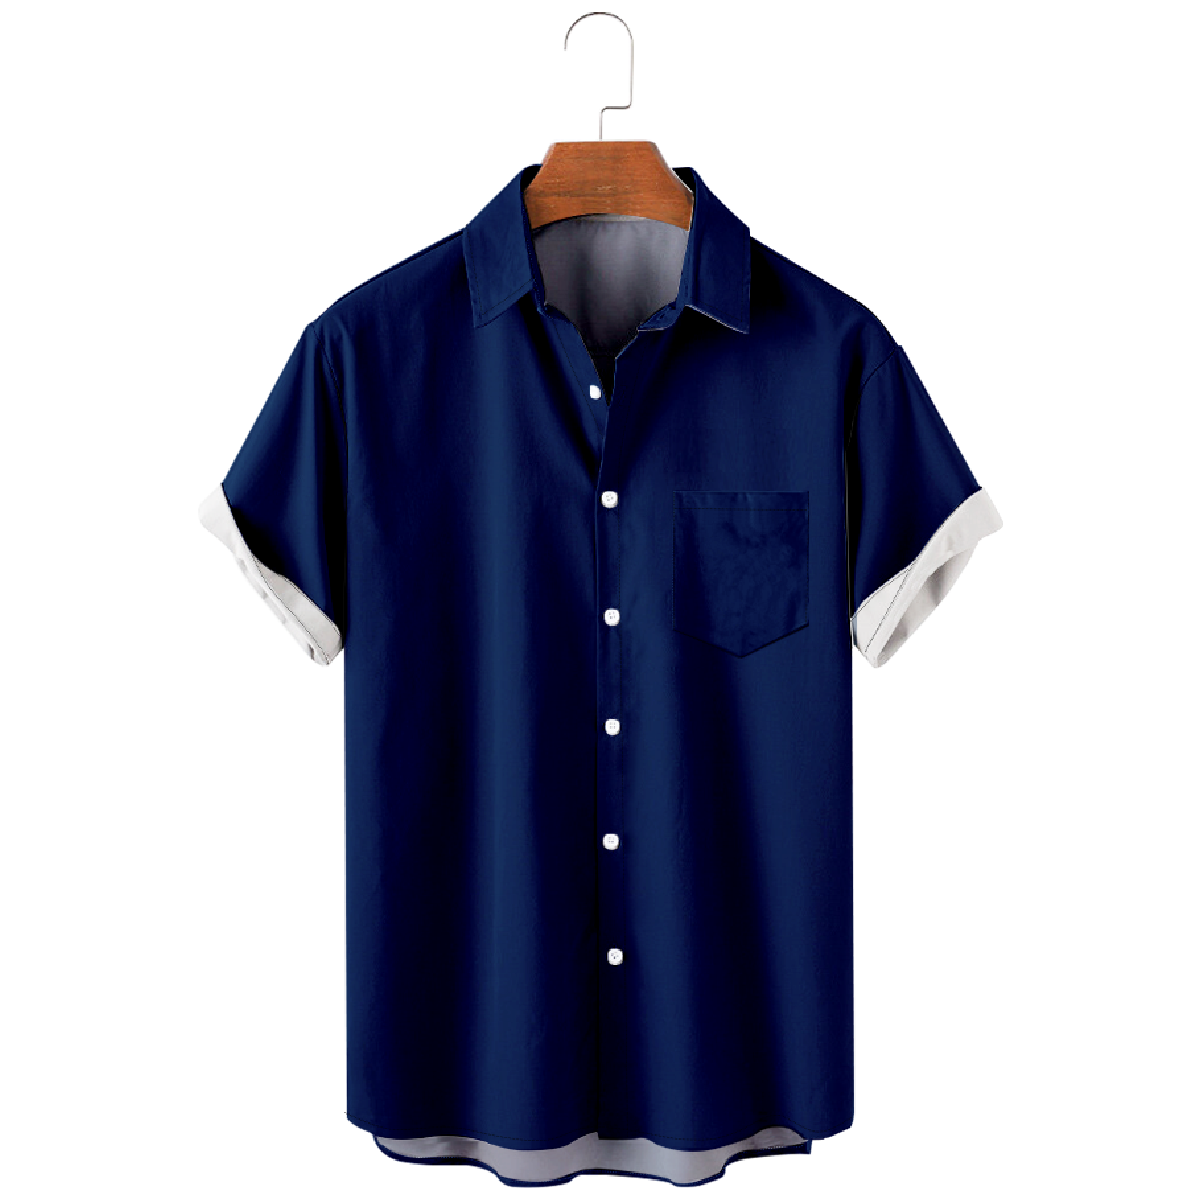 Indianapolis Speed Blue Button Up Shirt for Men Shirt with Front Pocket Short Sleeve